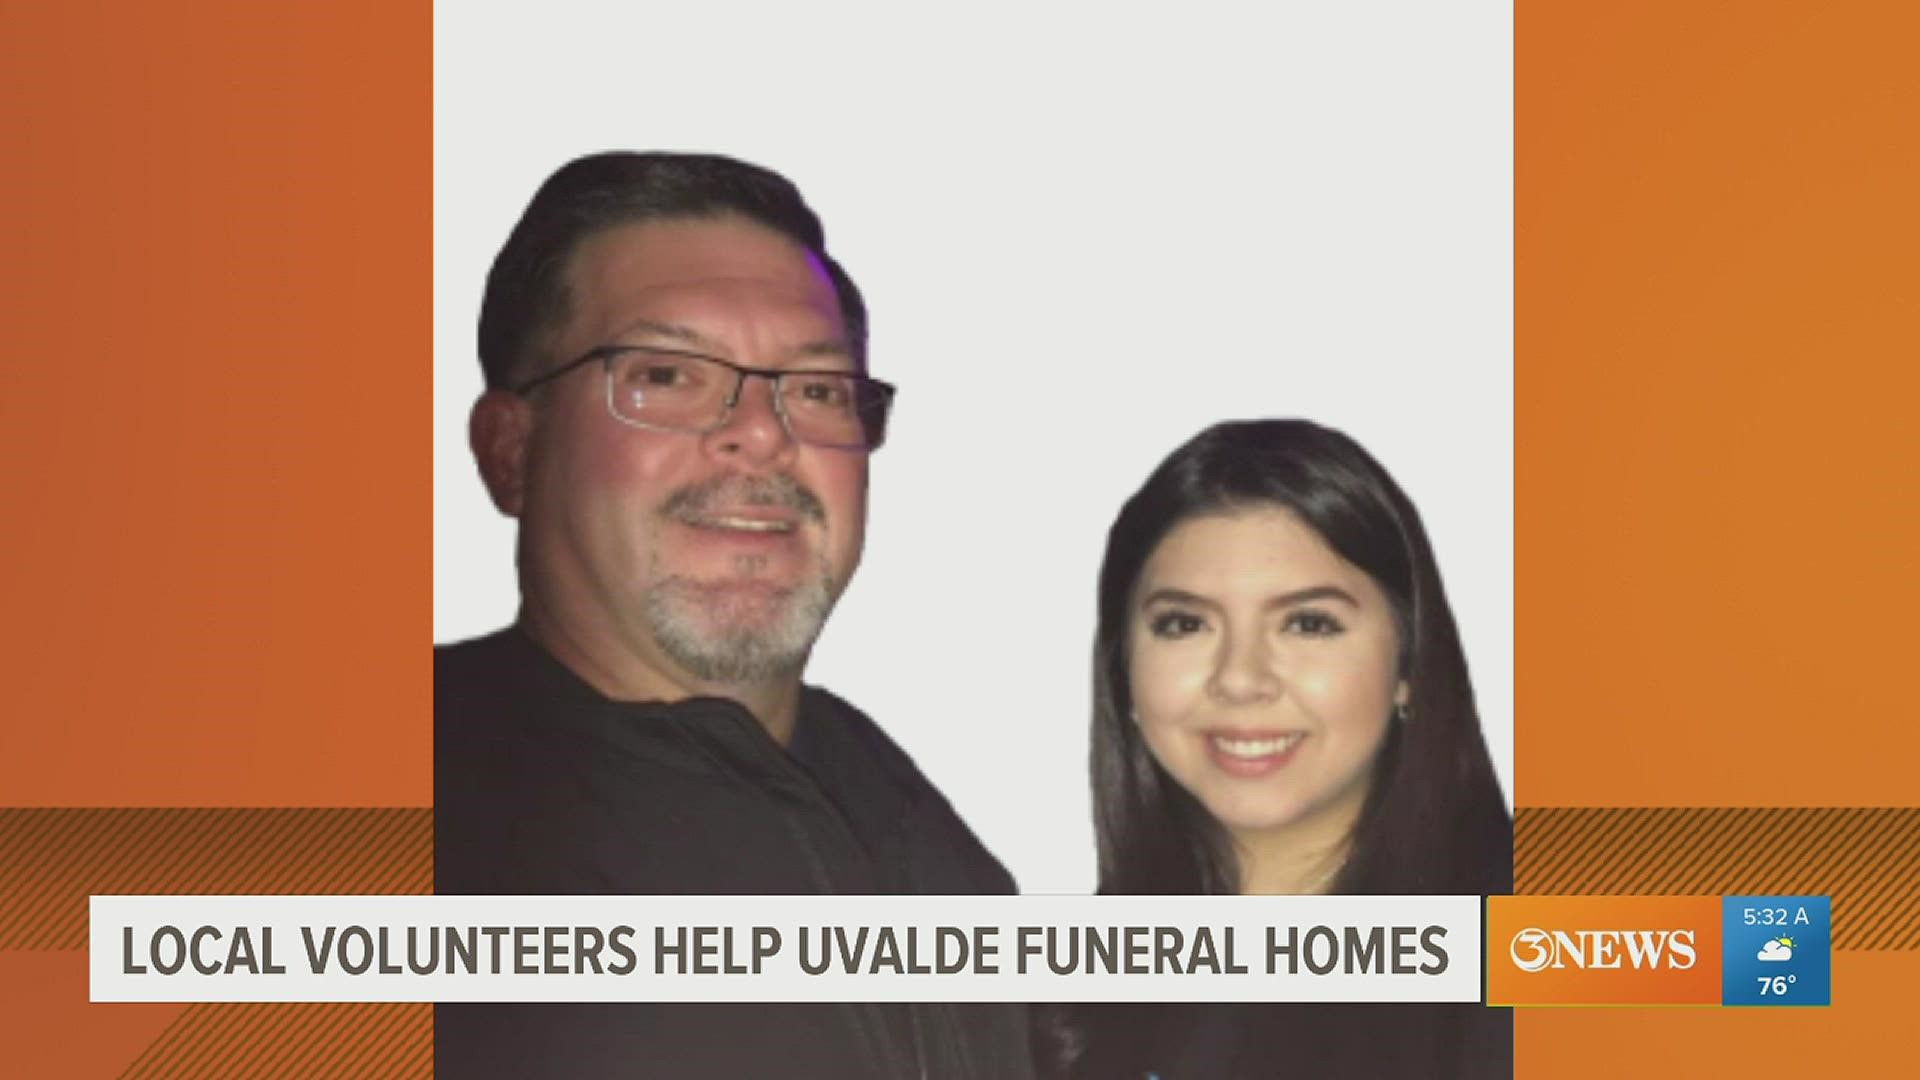 While Jamie has been getting victims ready for their funerals, Brianna has been meeting with families to help them with obituaries and other memorial services.